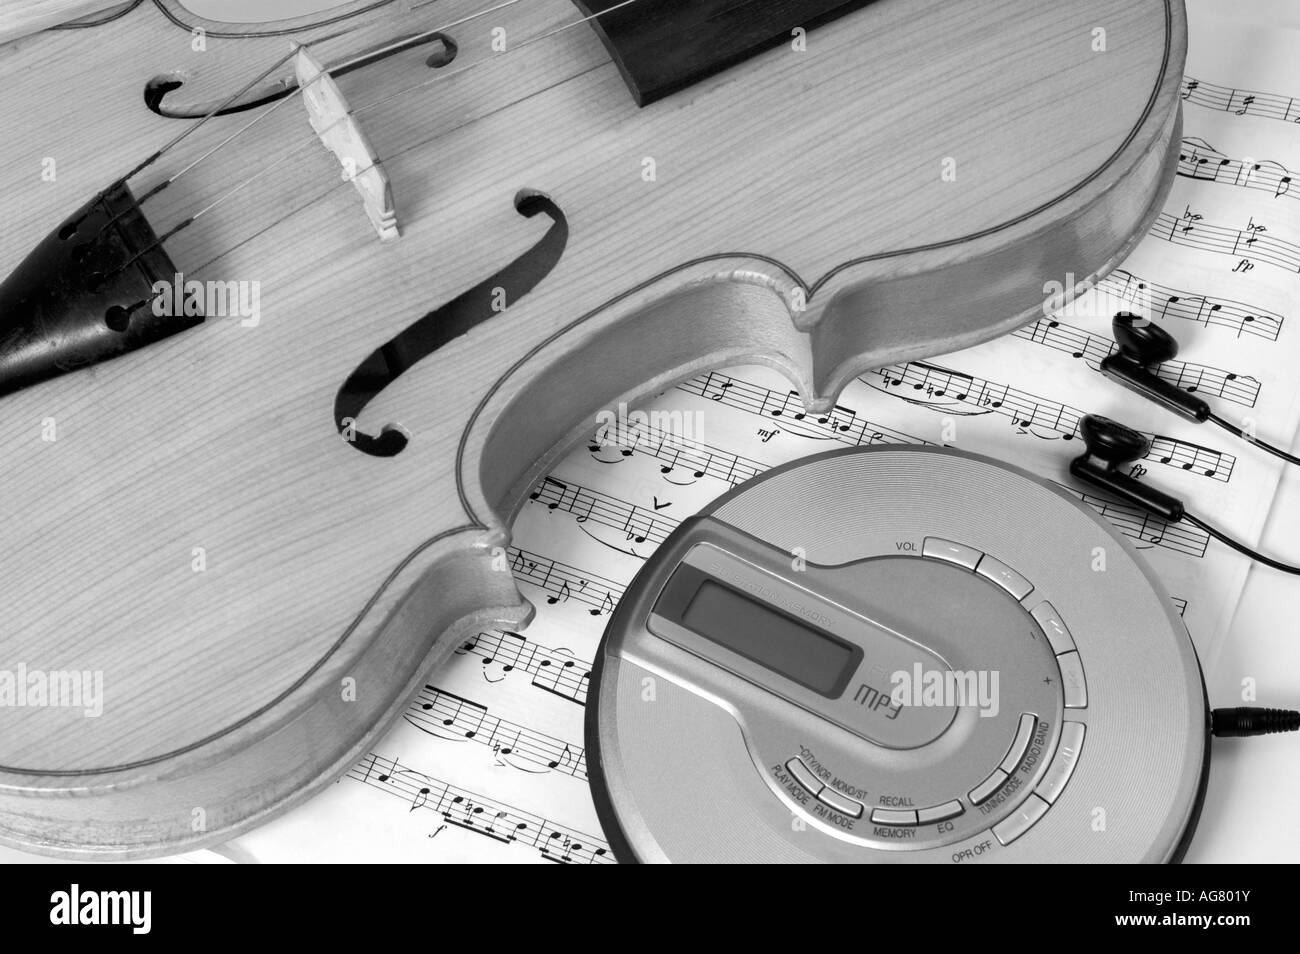 CD player and a violin Modern music Musical instruments and electronics Stock Photo